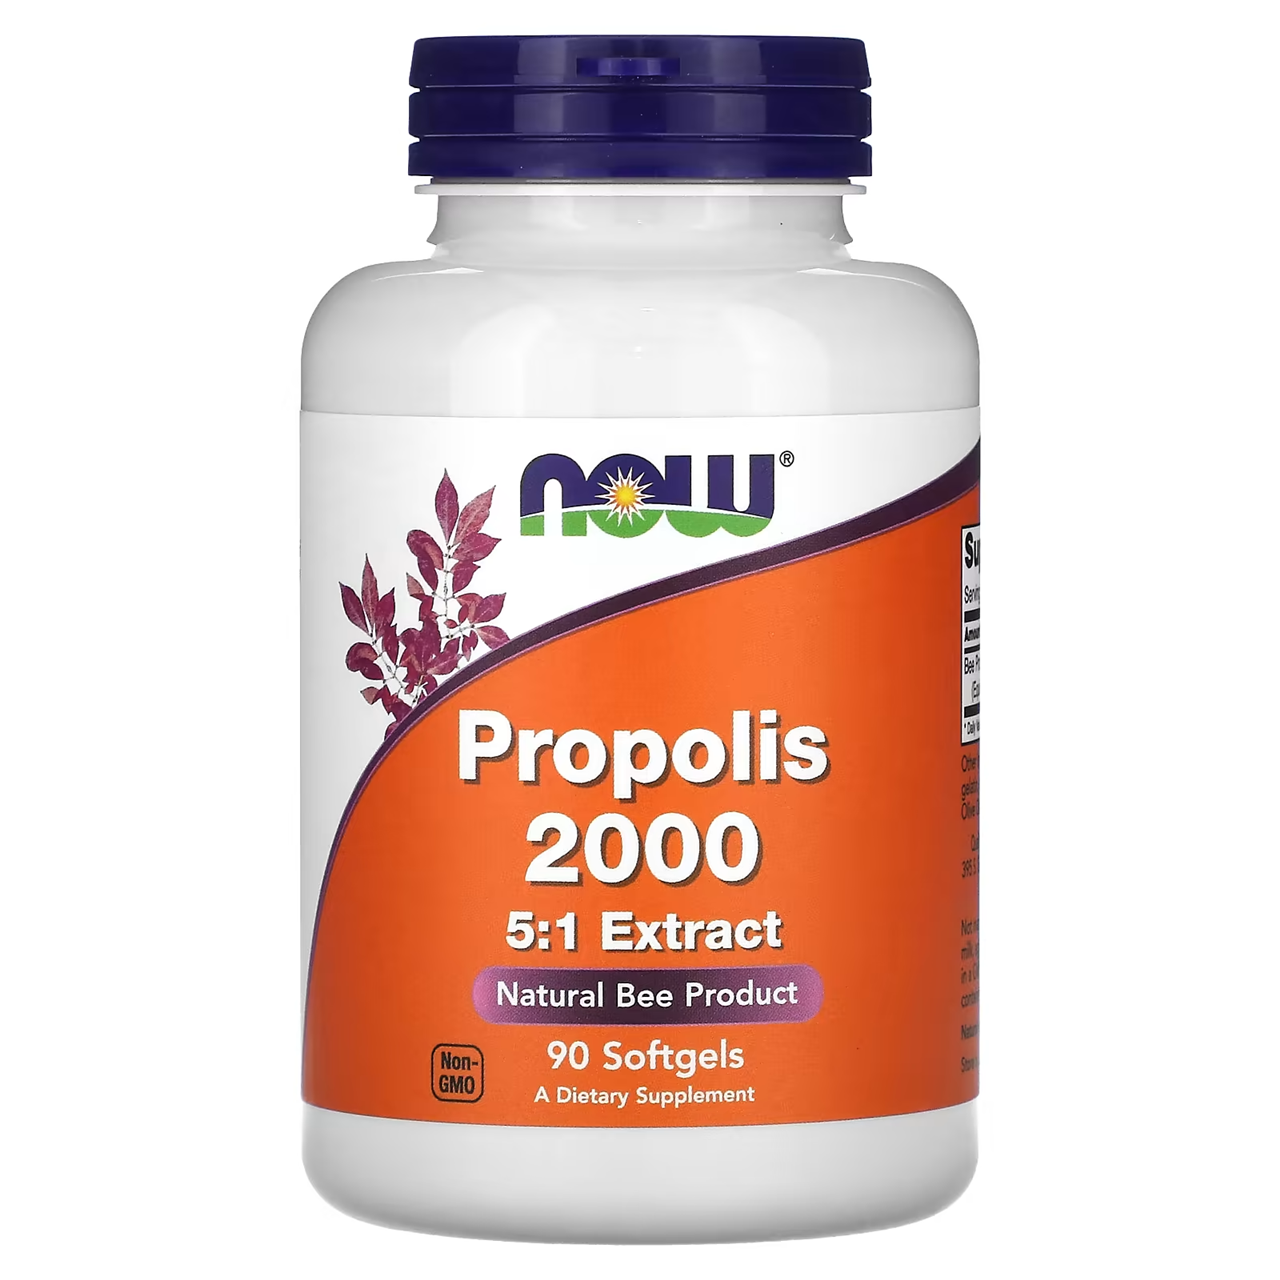 NOW Foods Propolis 2000 (5:1 Extract) / 90 Softgels